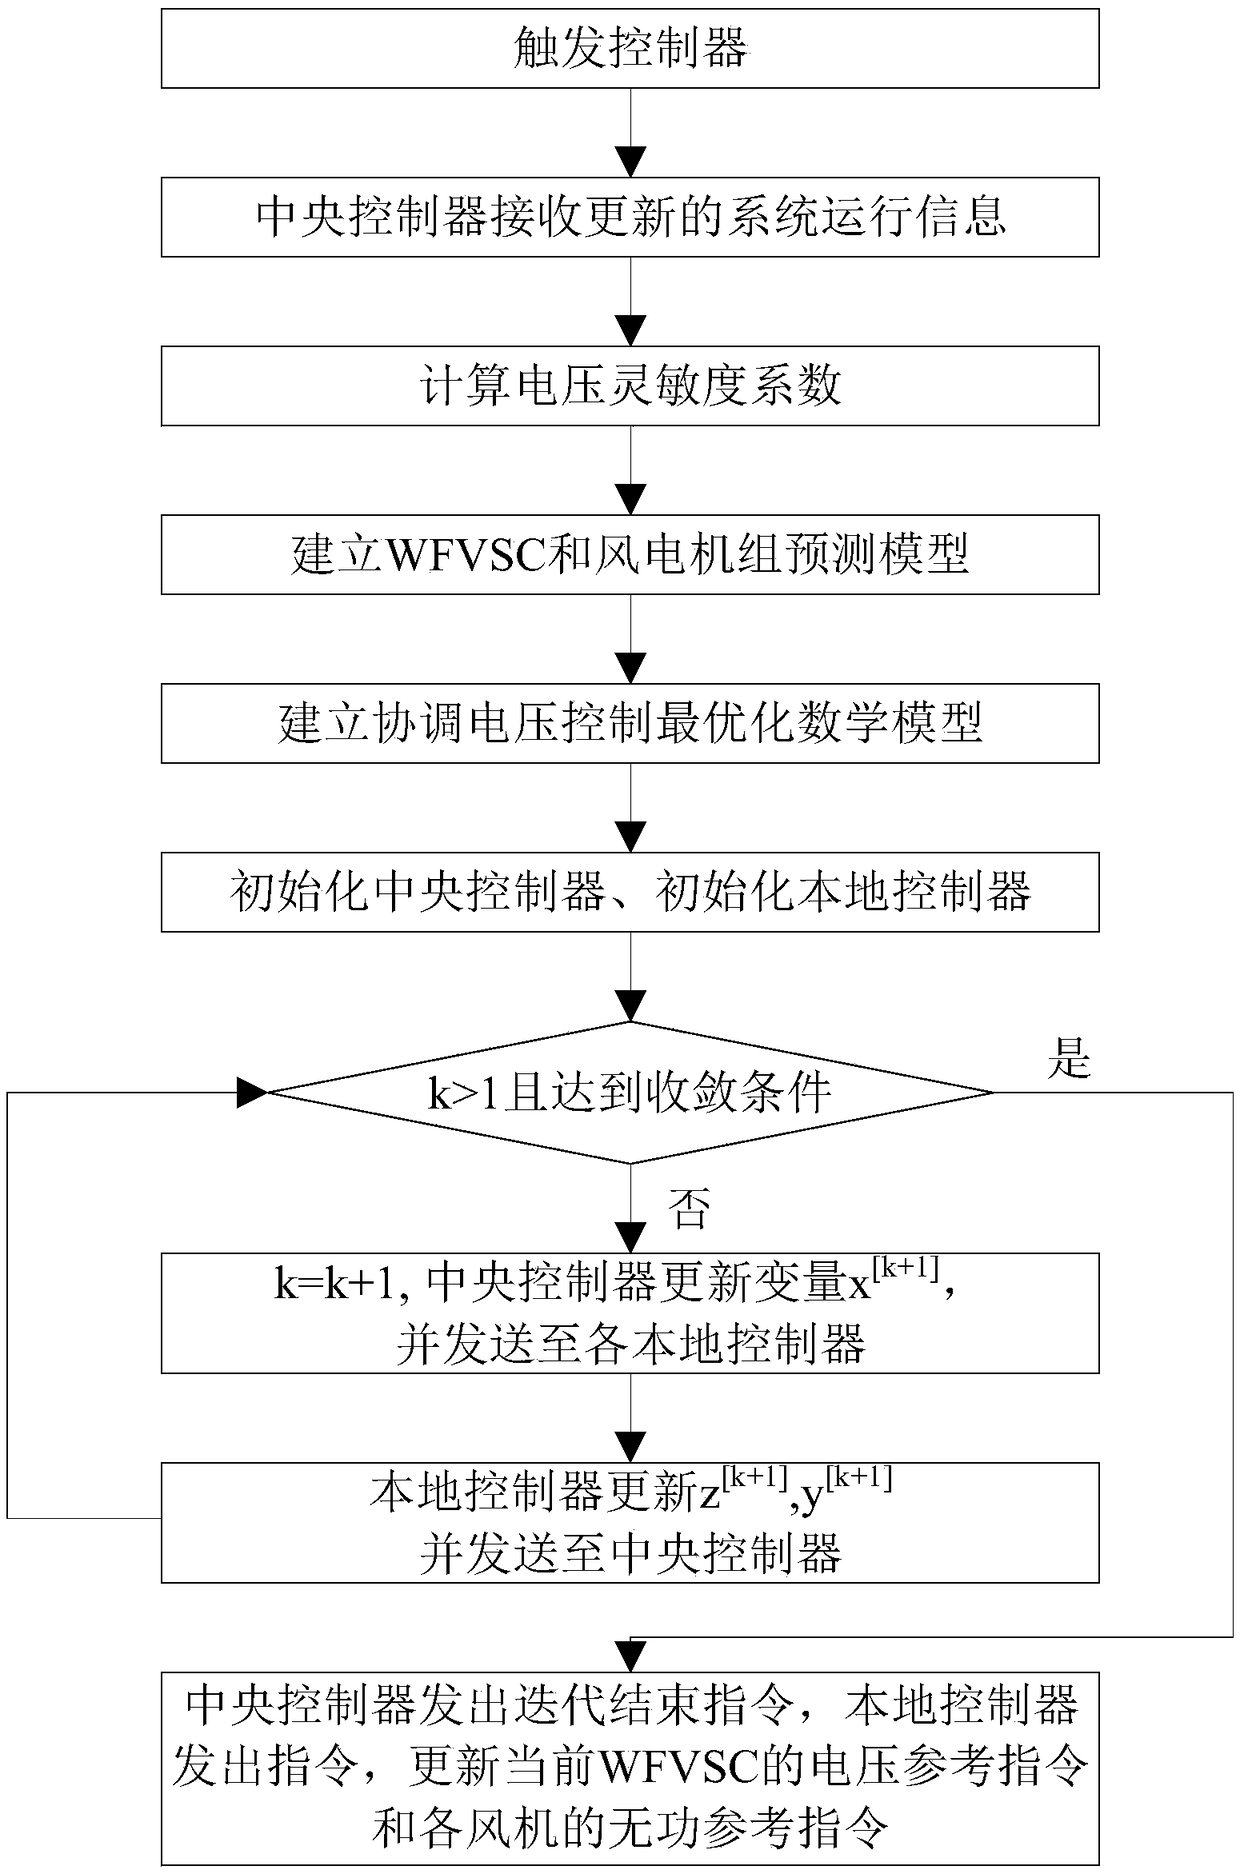 Distributed coordinated voltage control method and system for VSC-HVDC grid-connected wind farm based on MPC and ADMM algorithm